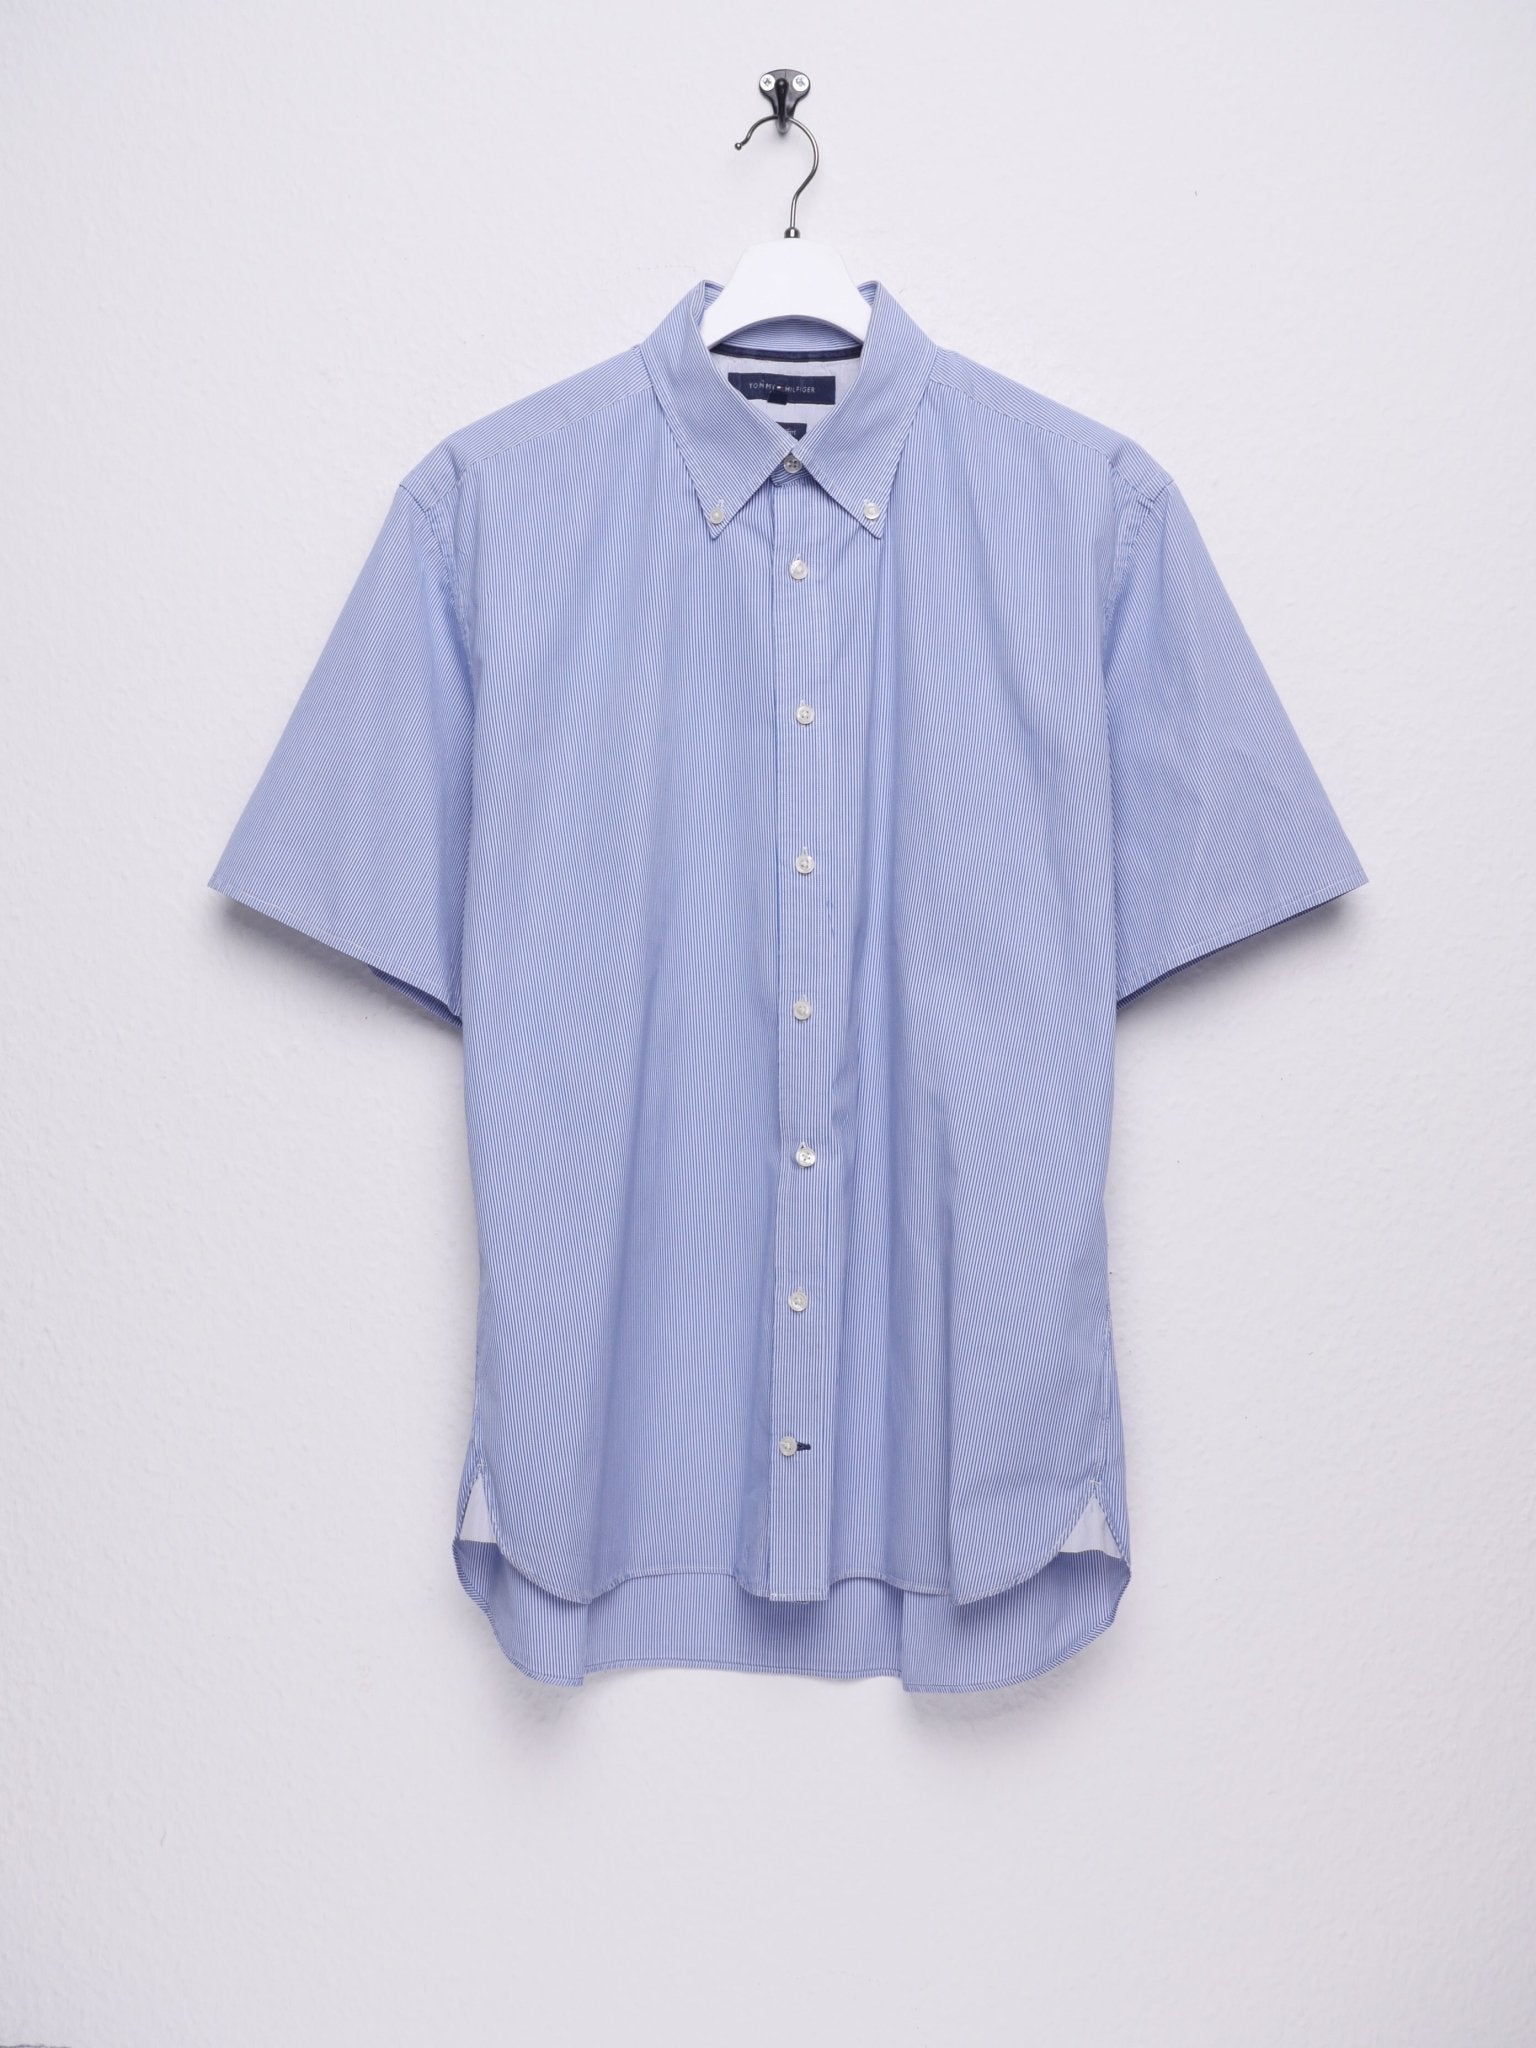 Tommy Hilfiger striped S/S Button Down - Peeces